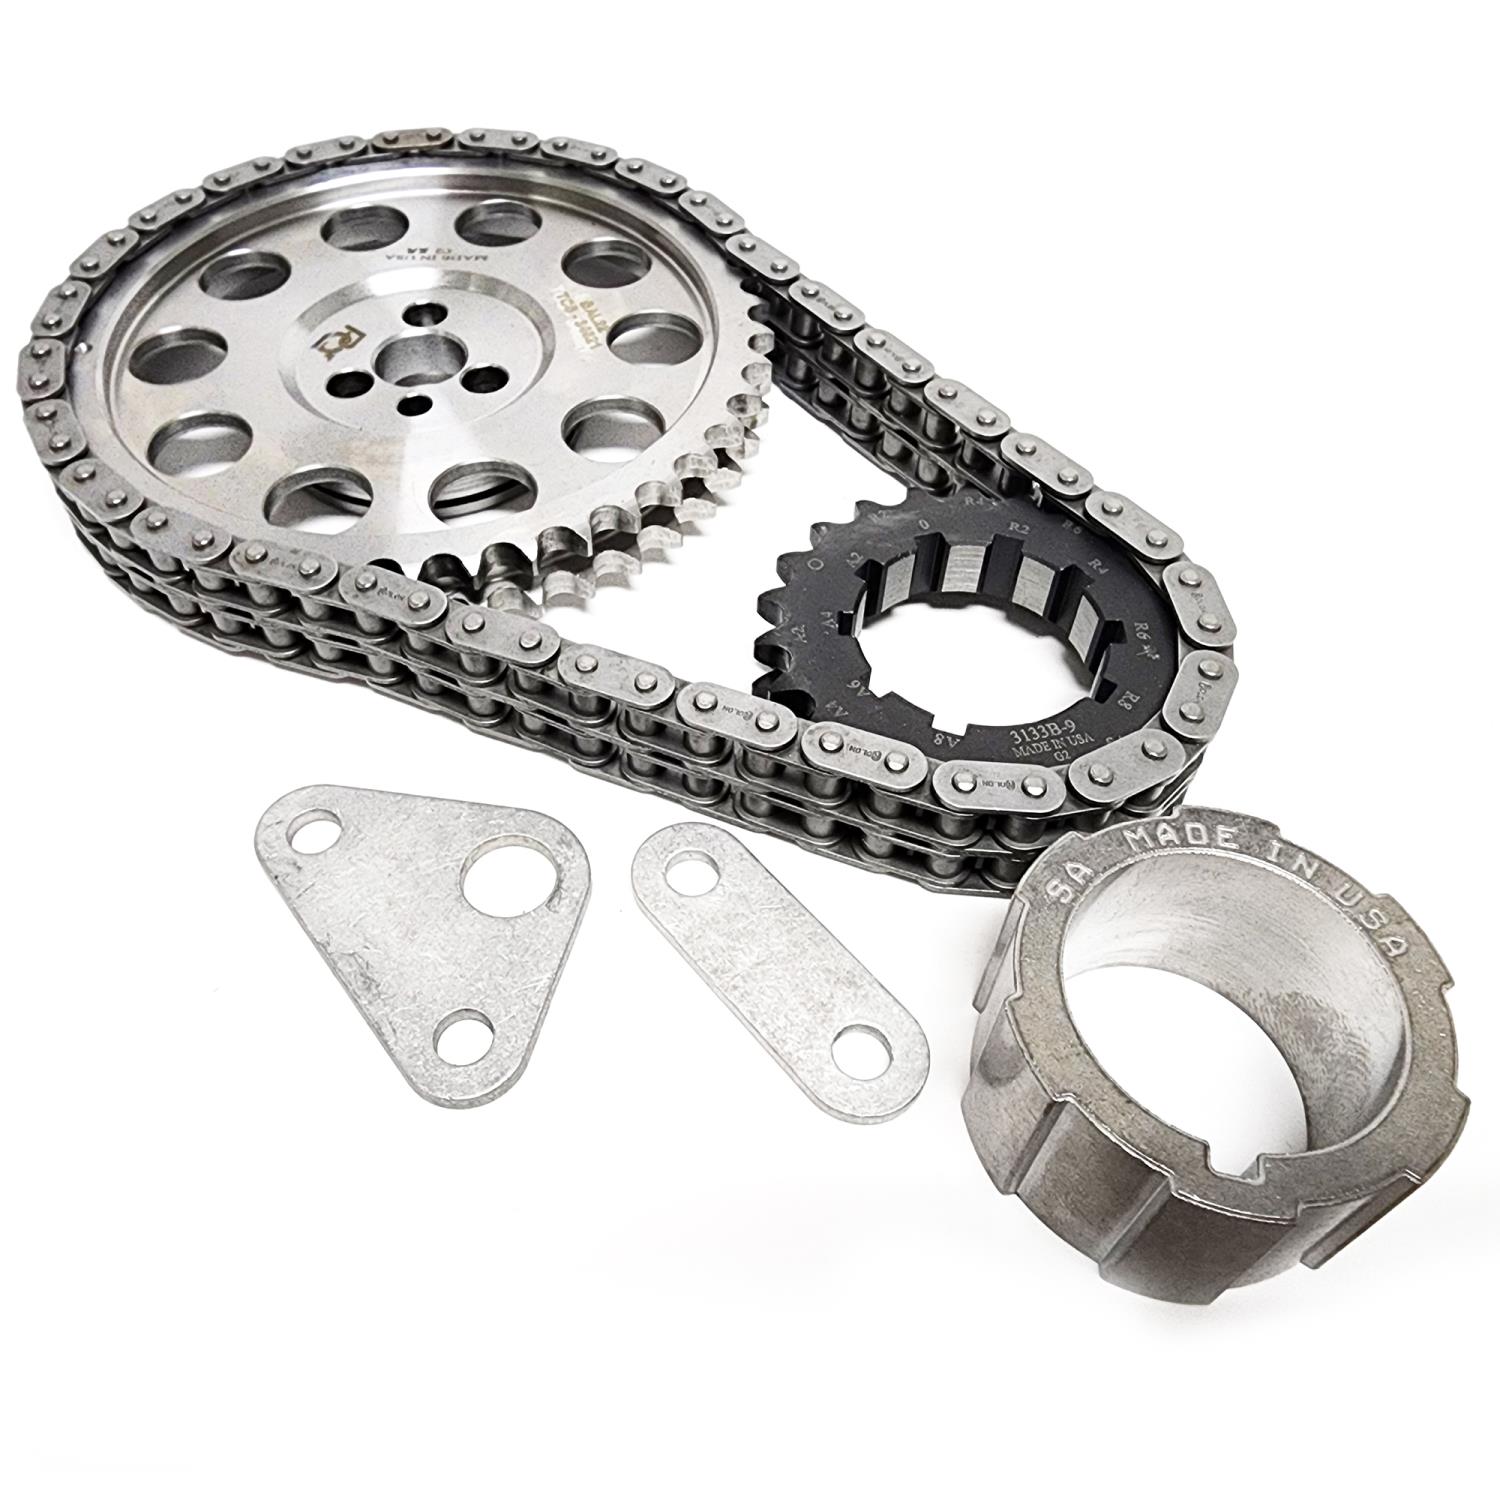 Double-Roller Timing Chain and Gear Set for 1997-2004